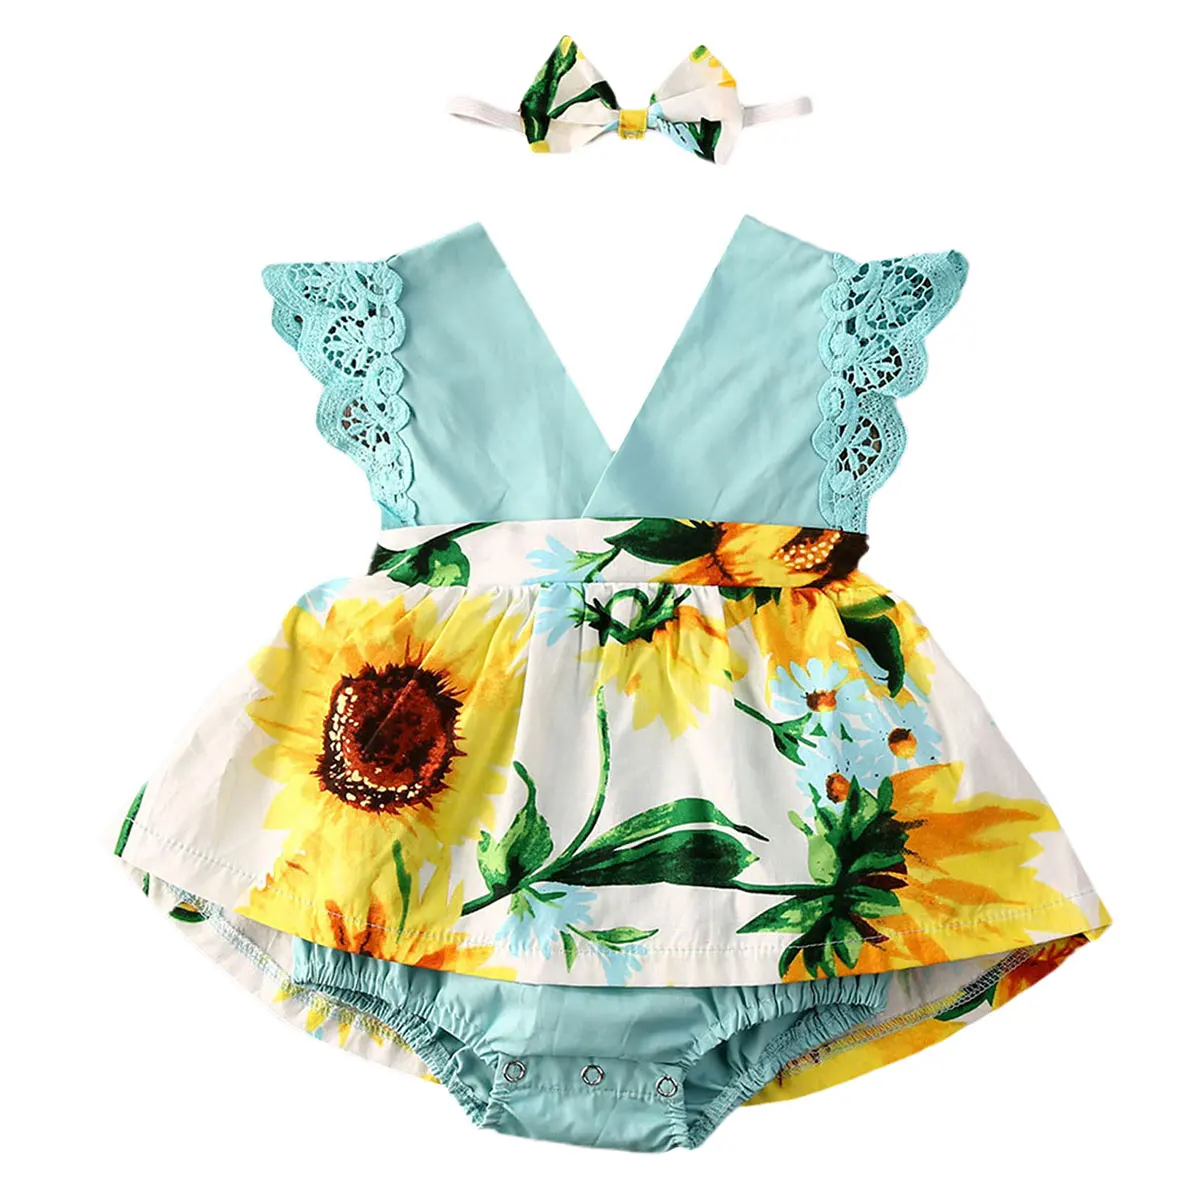 

Pudcoco Toddler Baby Girls Rompers Kids Clothes 2020 Sunflower Print Ruffles Lace Sleeve Jumpsuits Romper Dress+Headband 0-24M